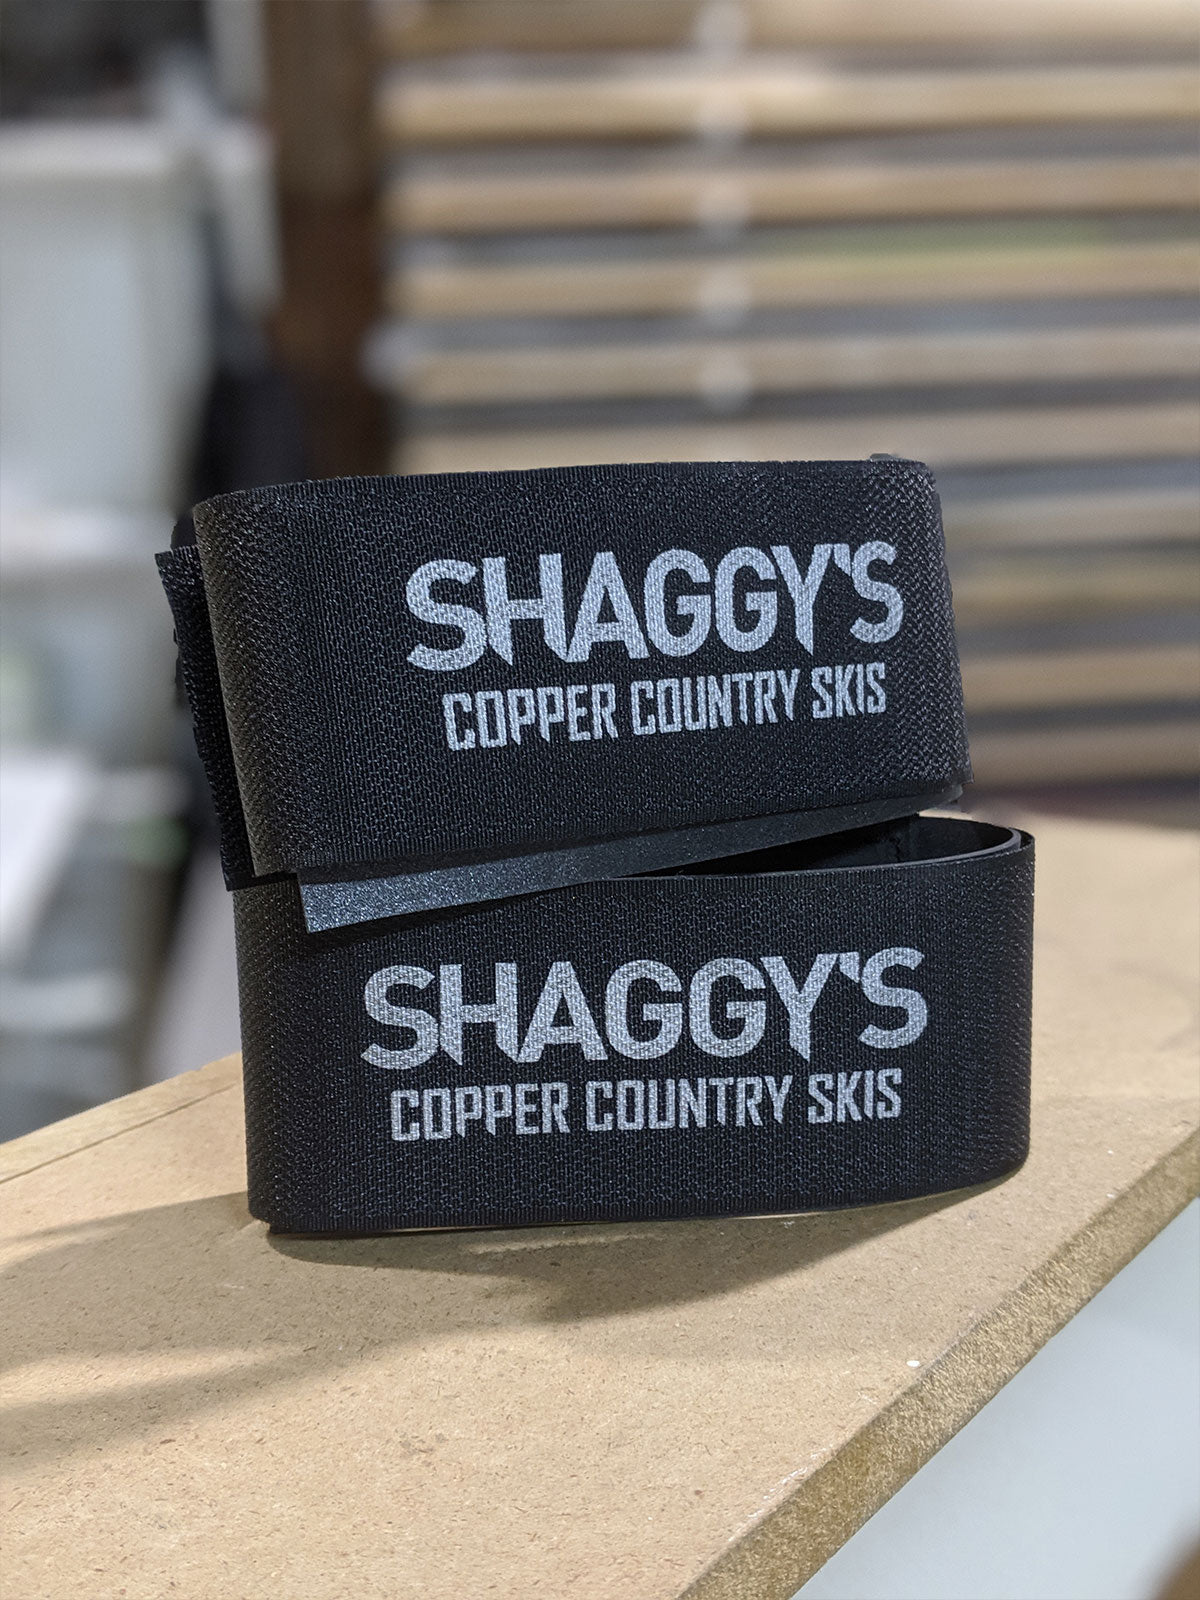 Shaggy's Ski Straps – Shaggy's Copper Country Skis